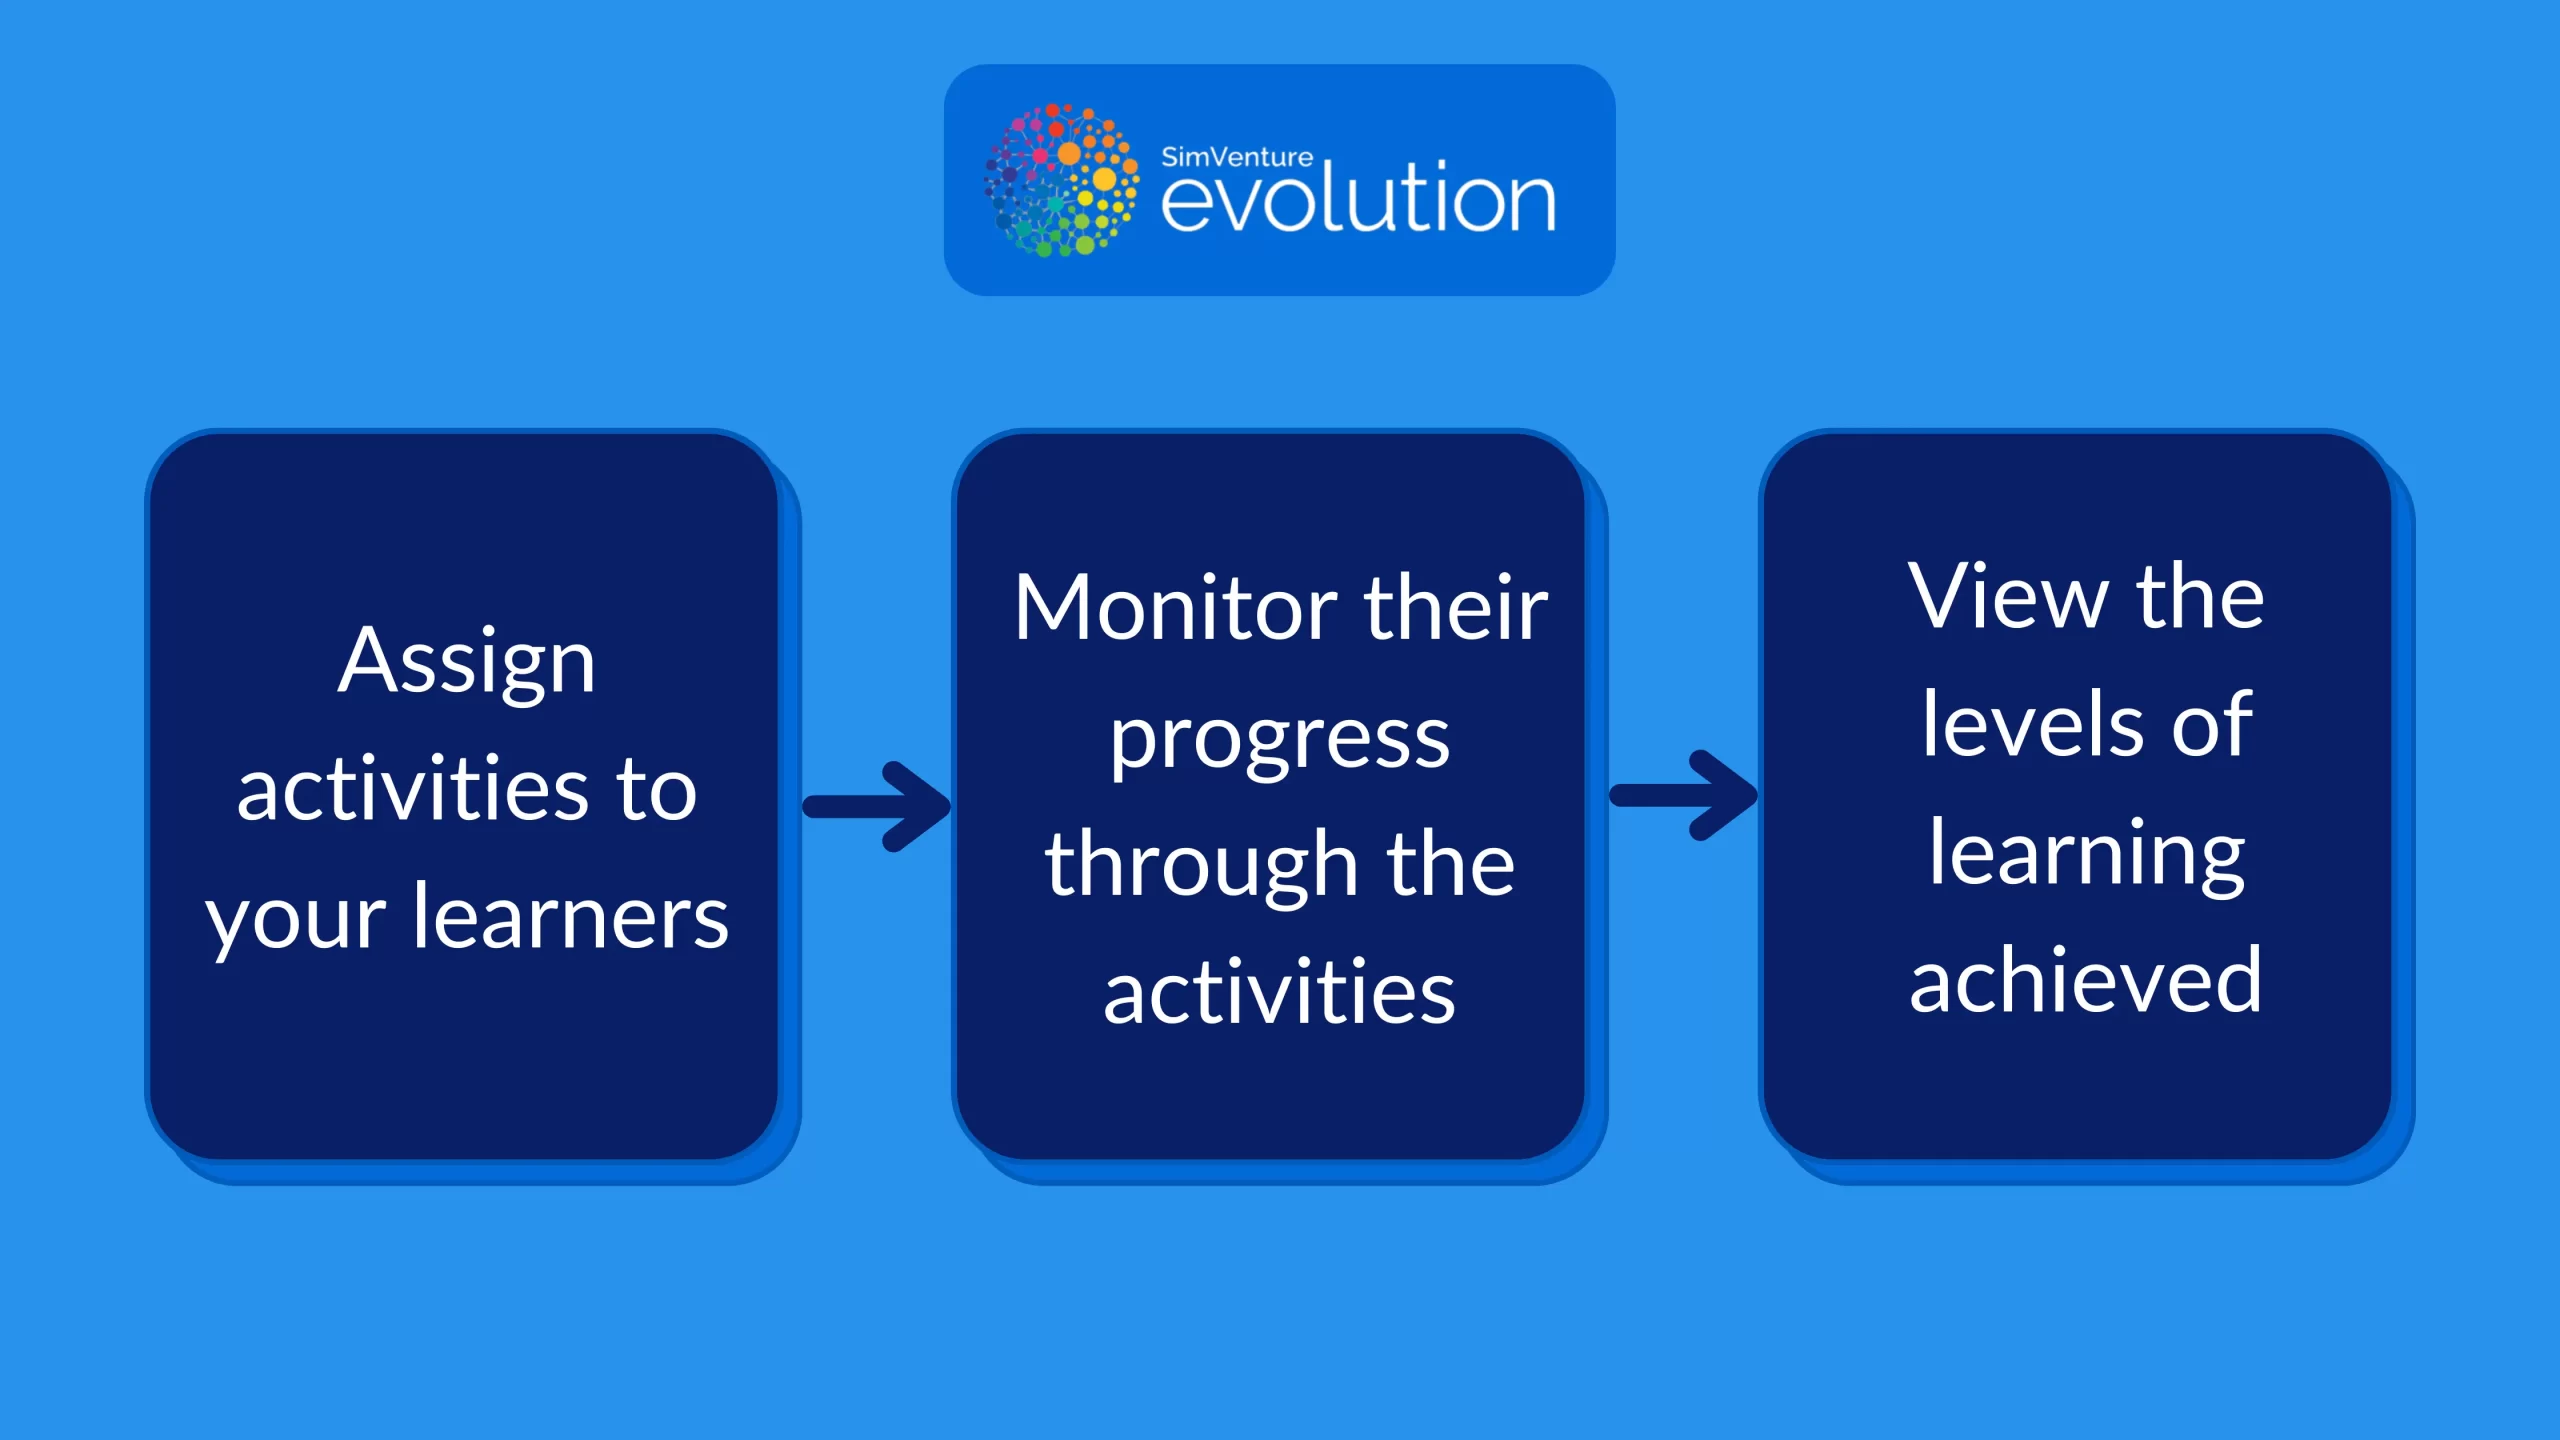 SimVenture Evolution Interactive will promote active, independent learning and save you time.